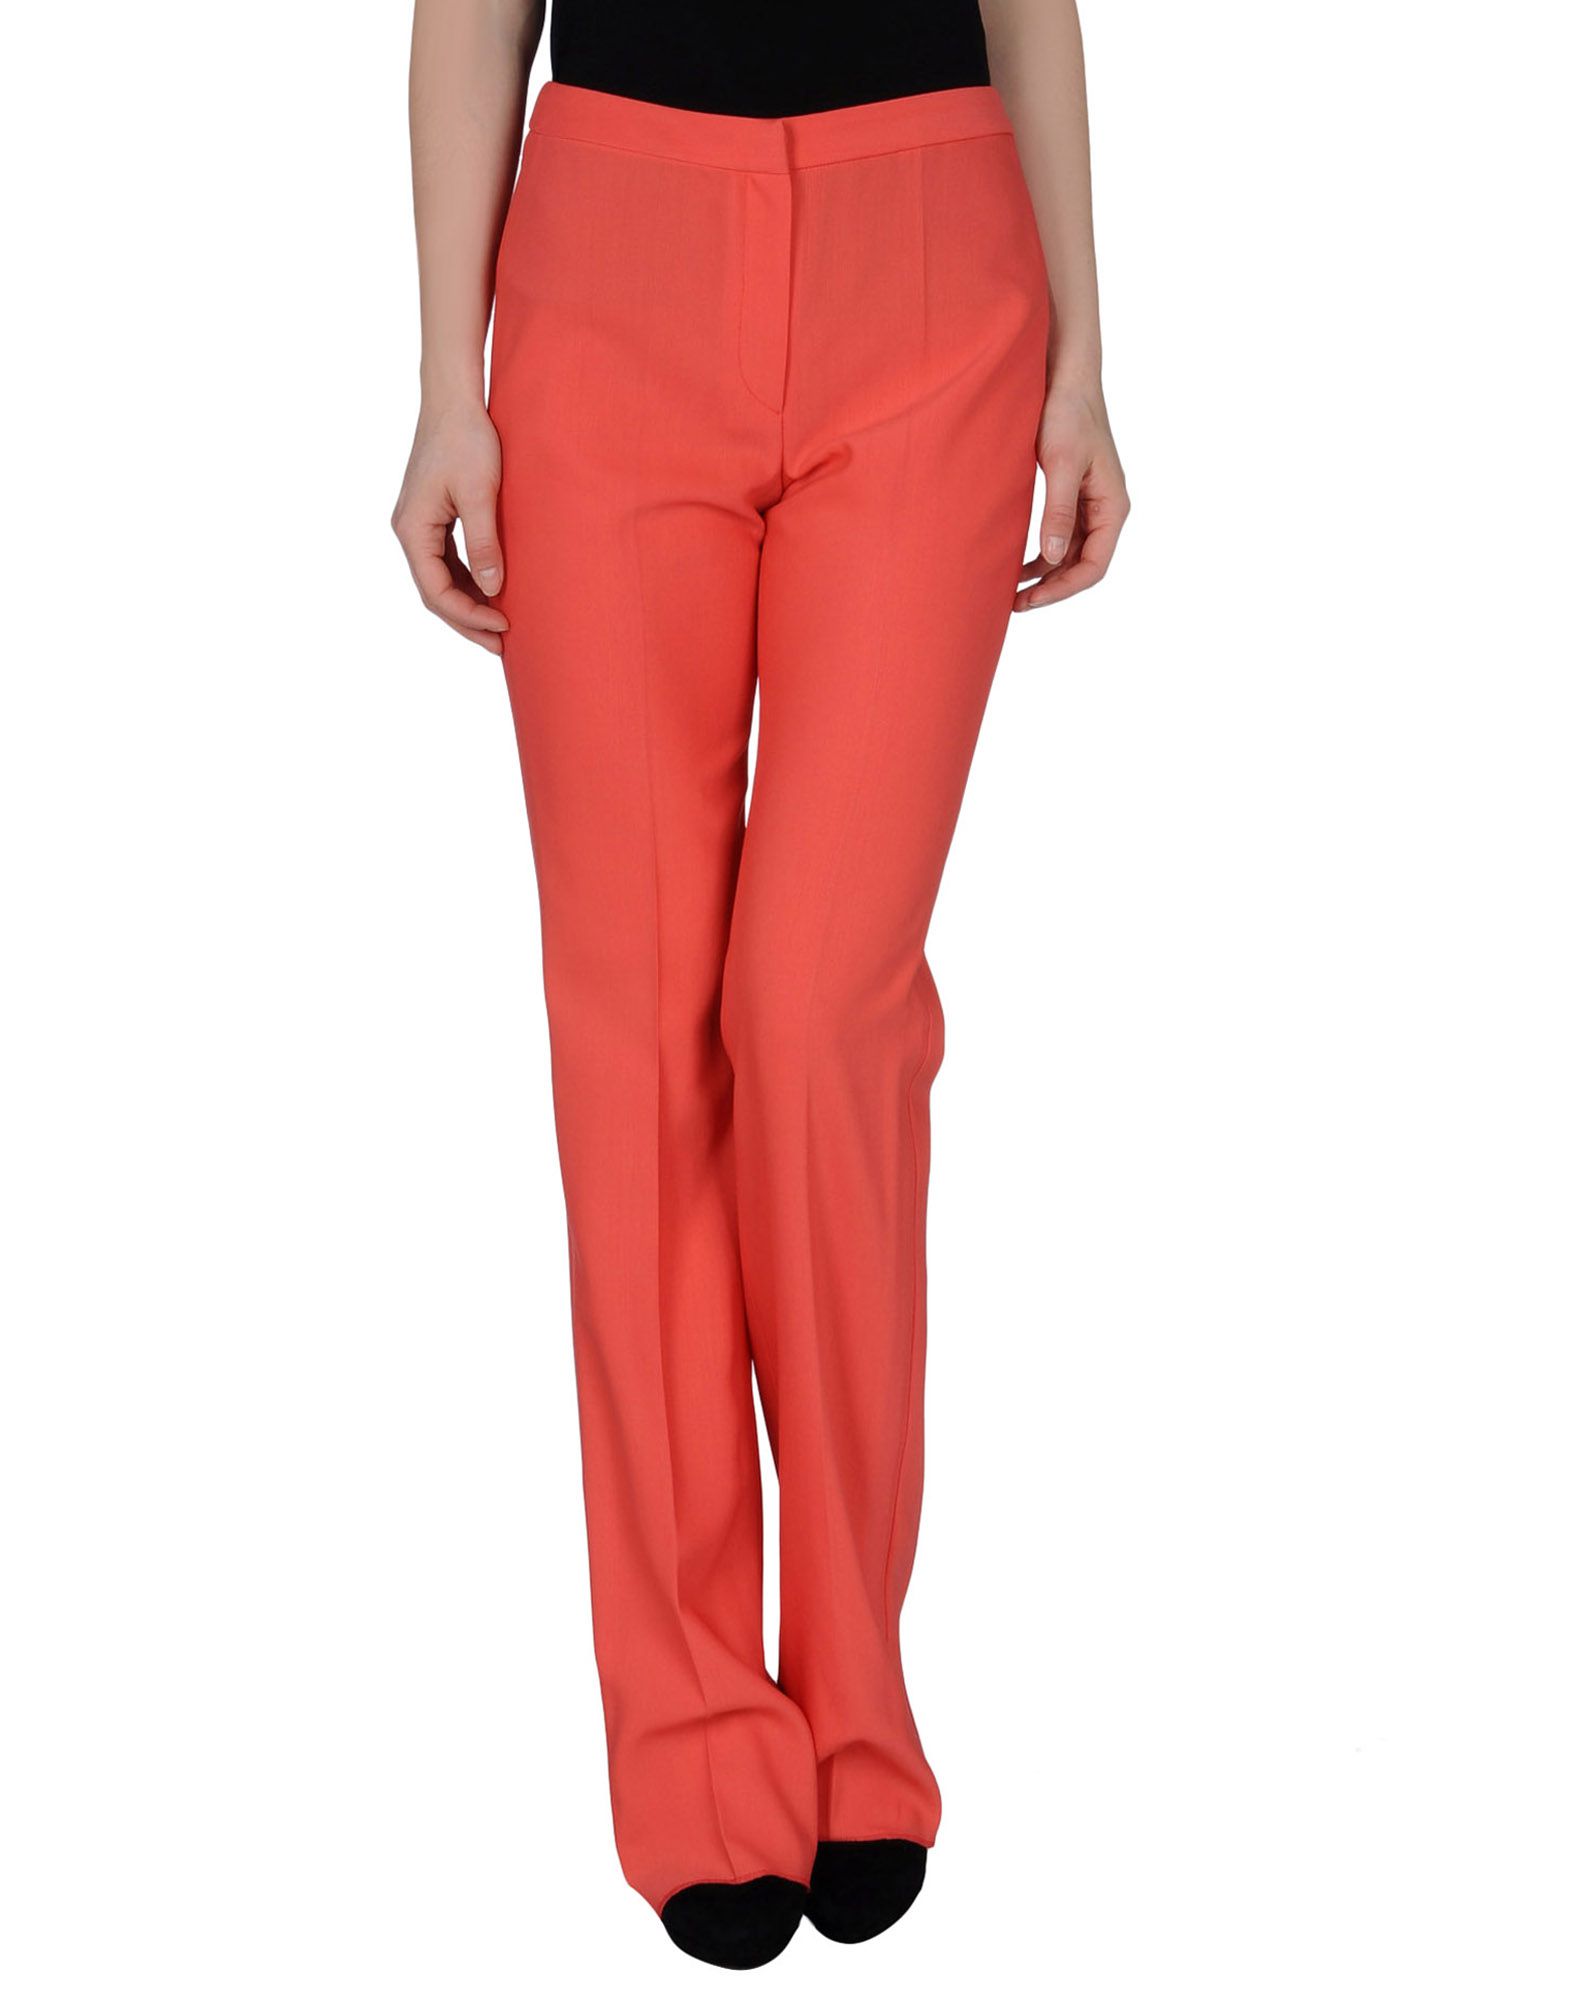 Foto Gianni Versace Couture Pantalones Mujer Coral foto 787679